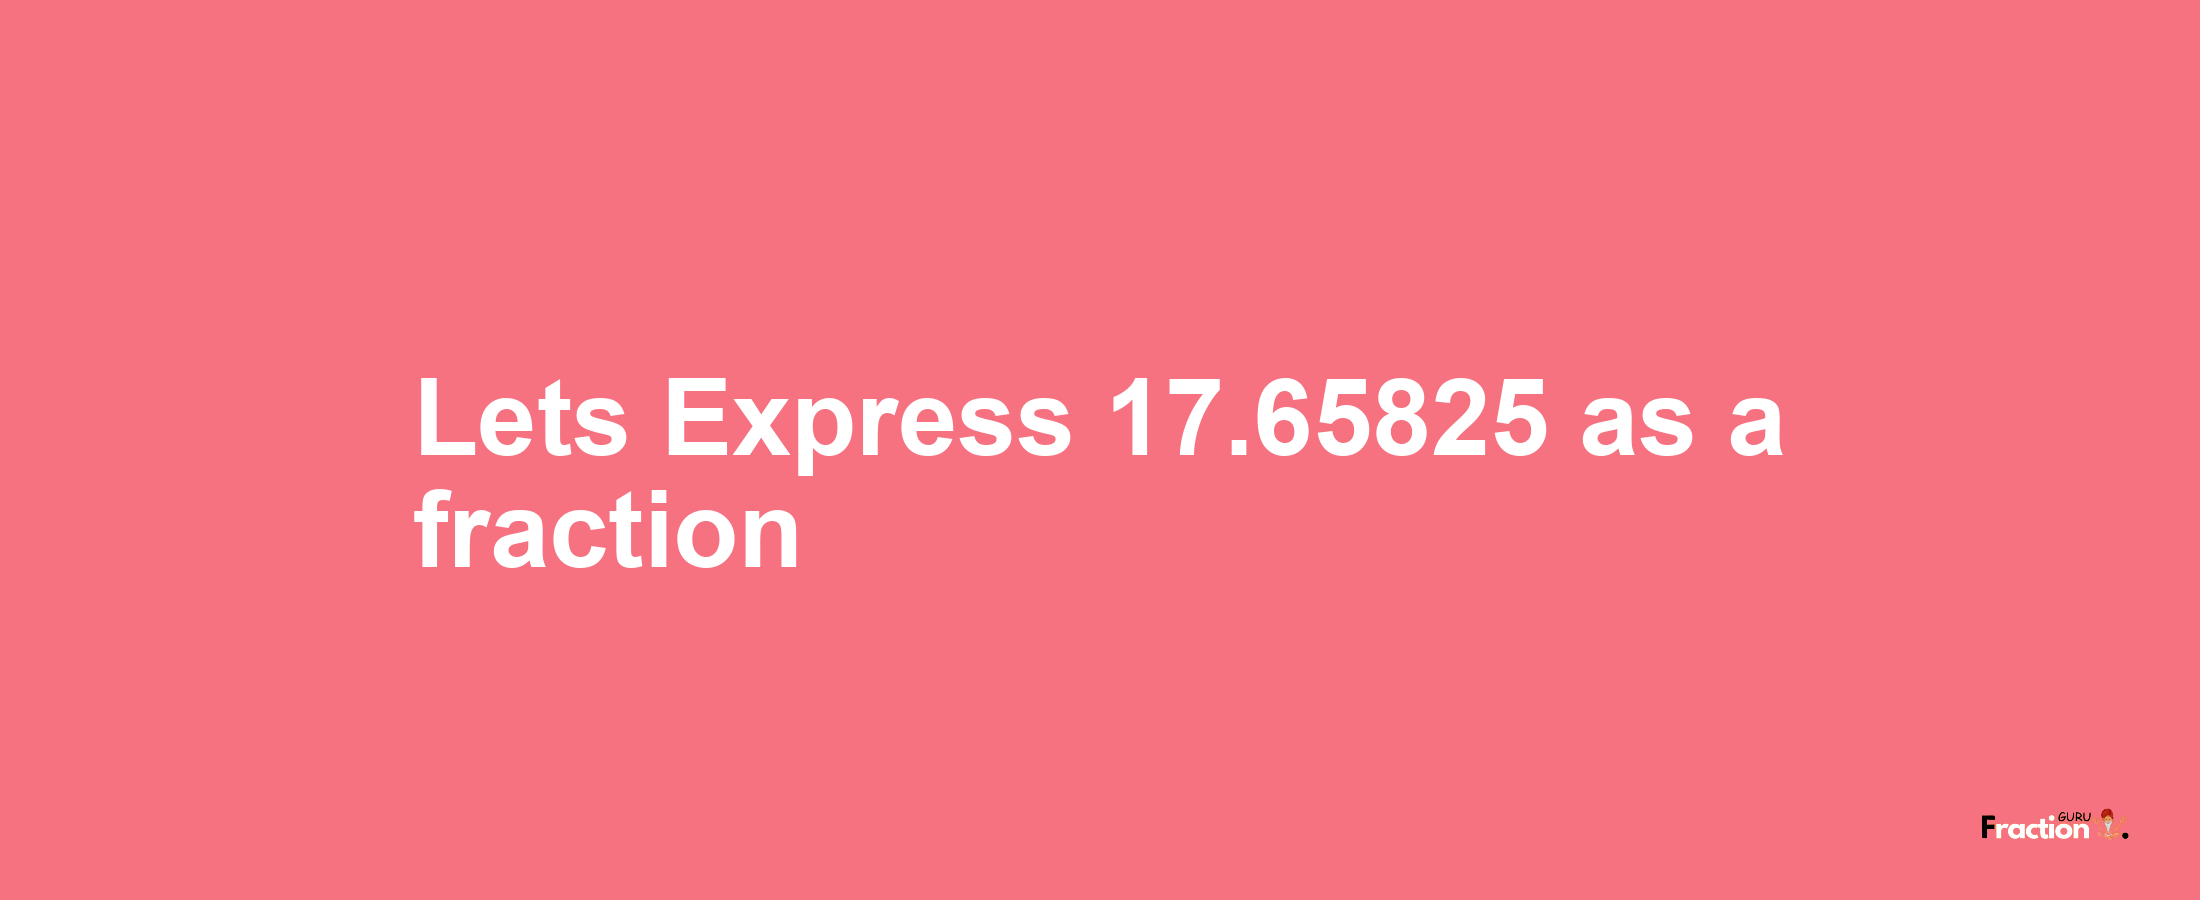 Lets Express 17.65825 as afraction